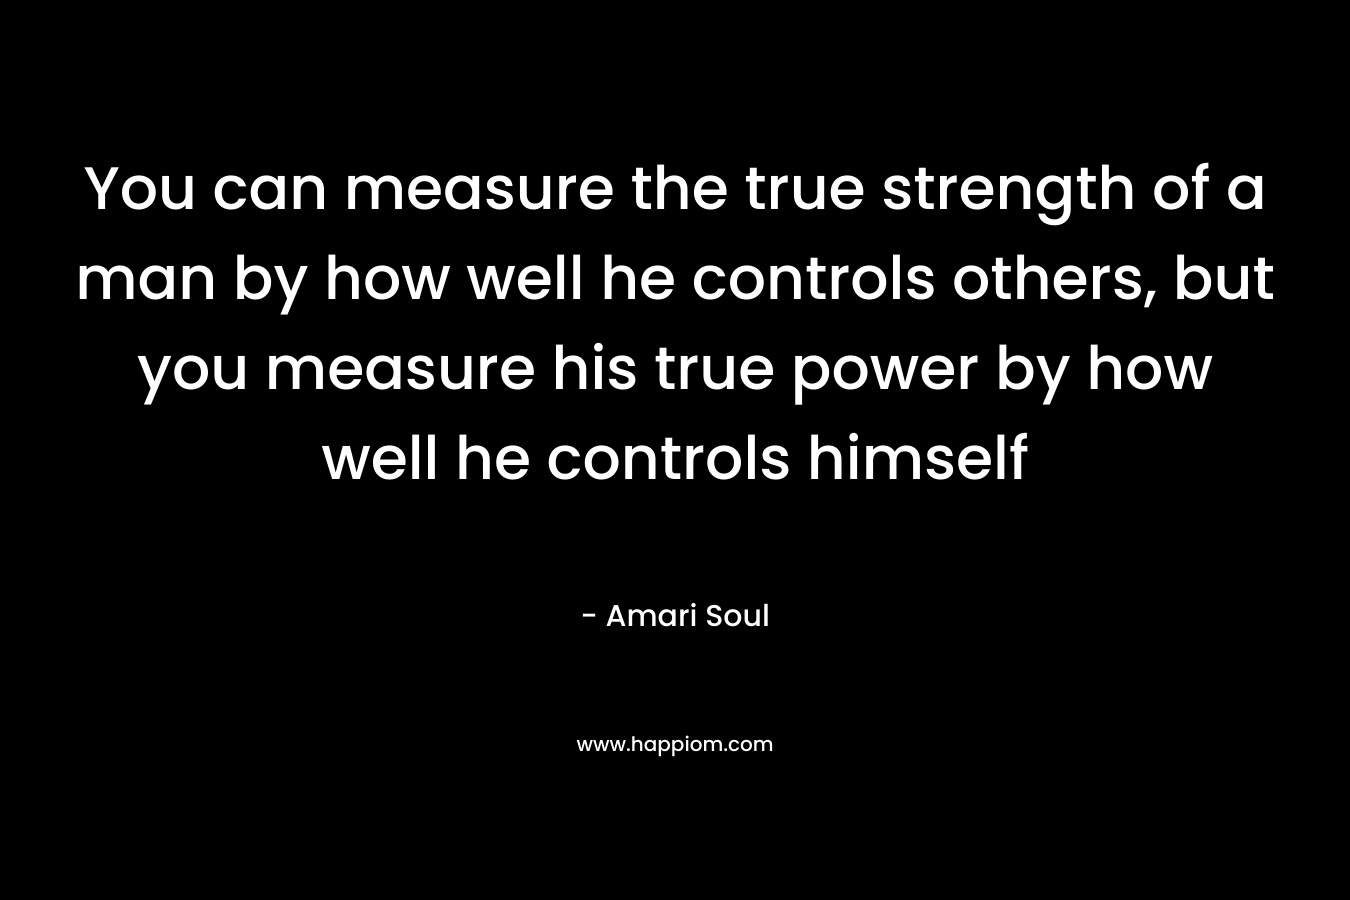 You can measure the true strength of a man by how well he controls others, but you measure his true power by how well he controls himself – Amari Soul